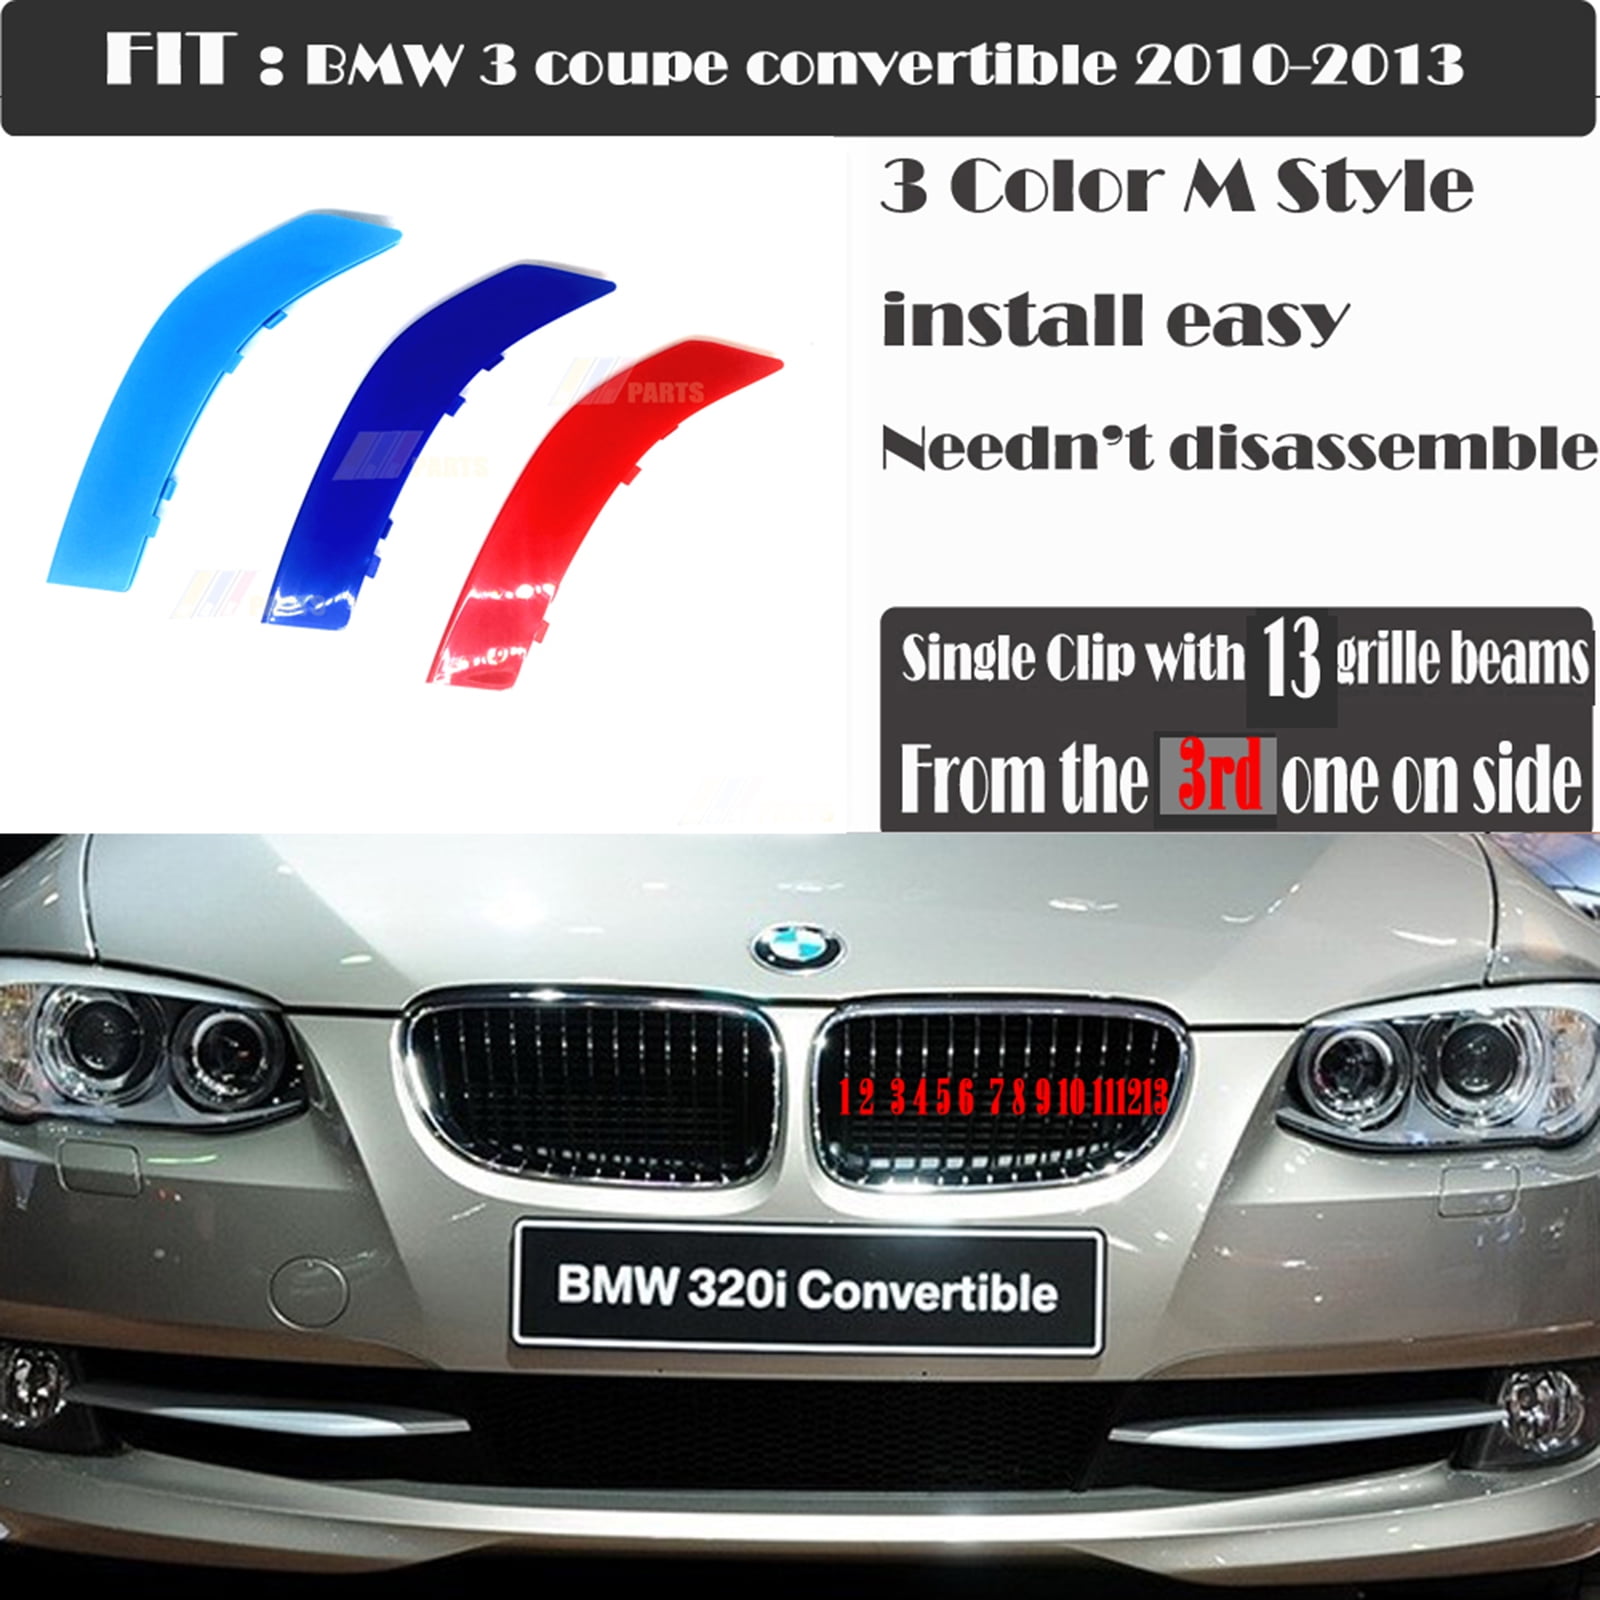 Trimla M-Colored Grille Insert Trim Performance Sport for 05-09 BMW 3 series  M3 2door E92 E93 Fit 316i 318i 320i 325d 328i 330i 330d 335i 2005 2006 2007  2008 2009 Kidney Strips Clips Cover 